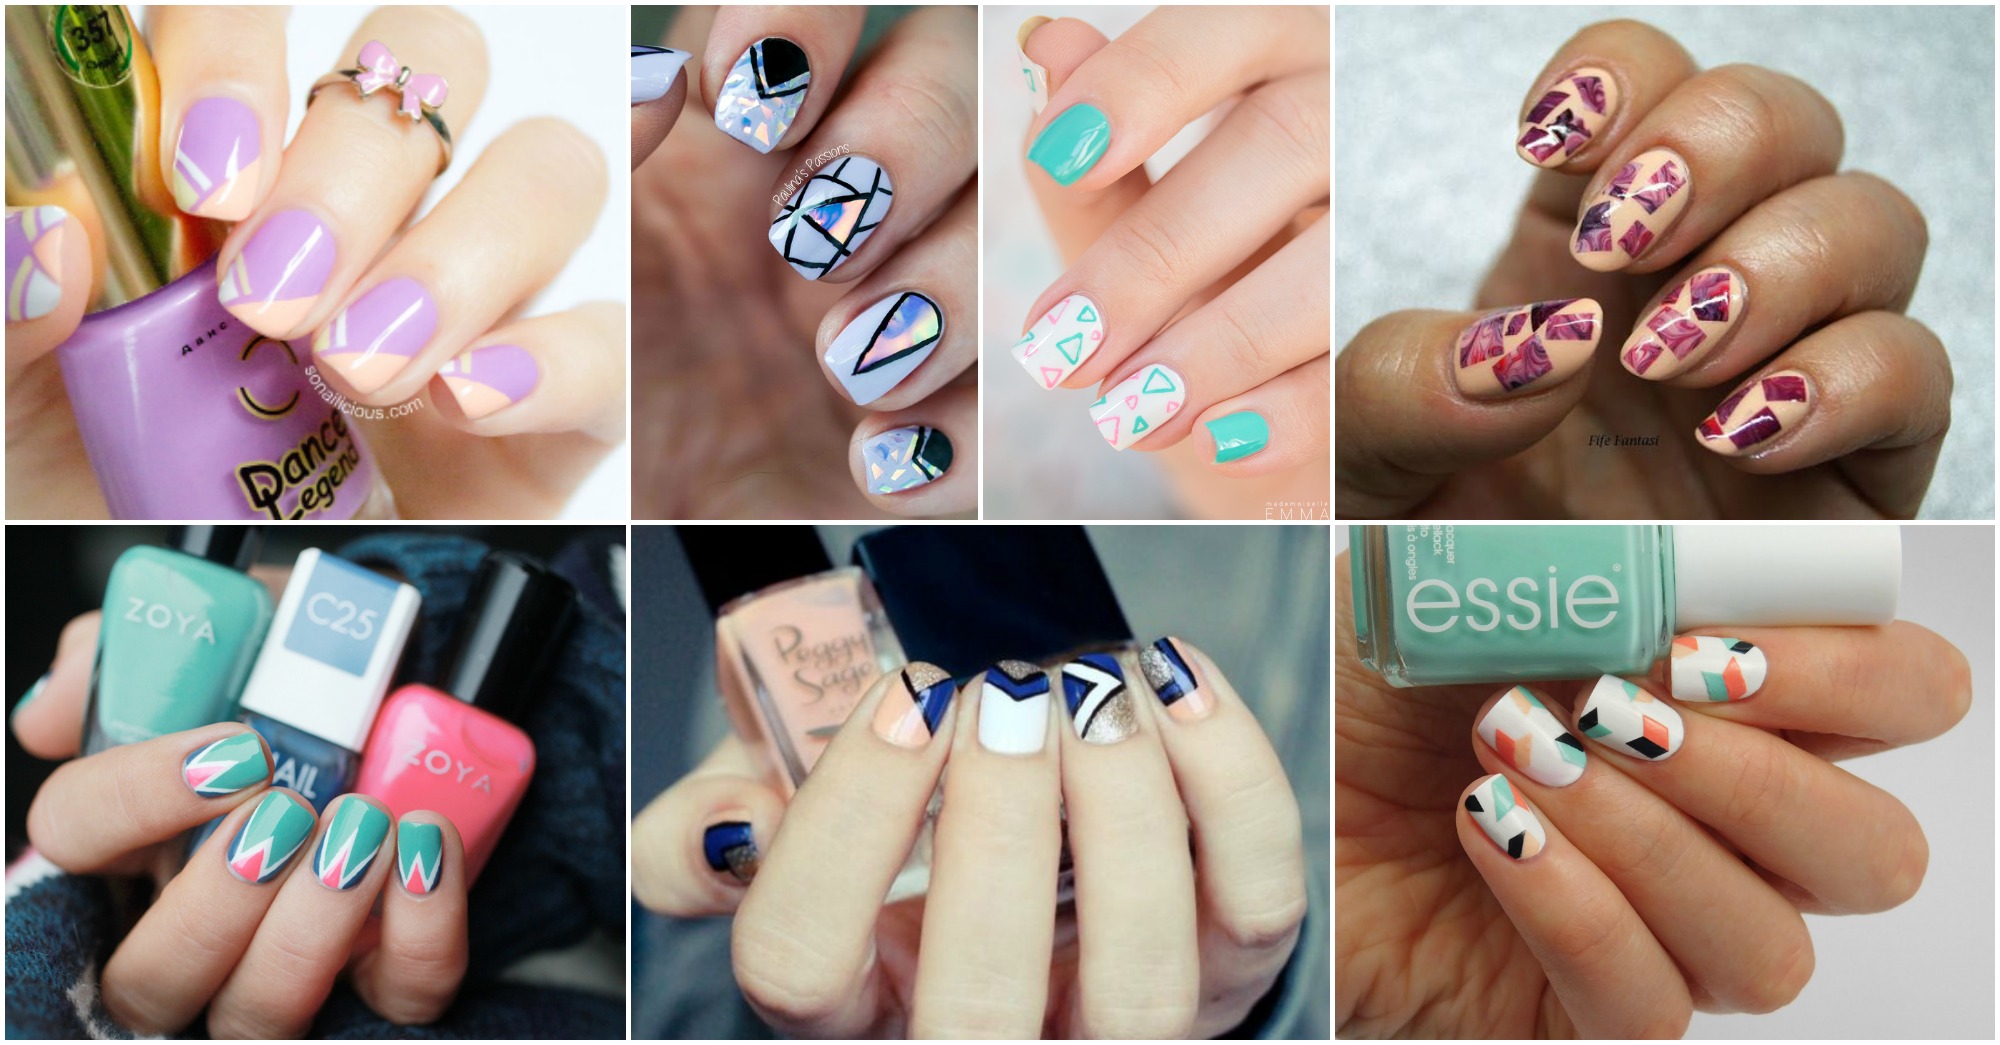 5. Geometric Nail Designs in Bold Colors - wide 4